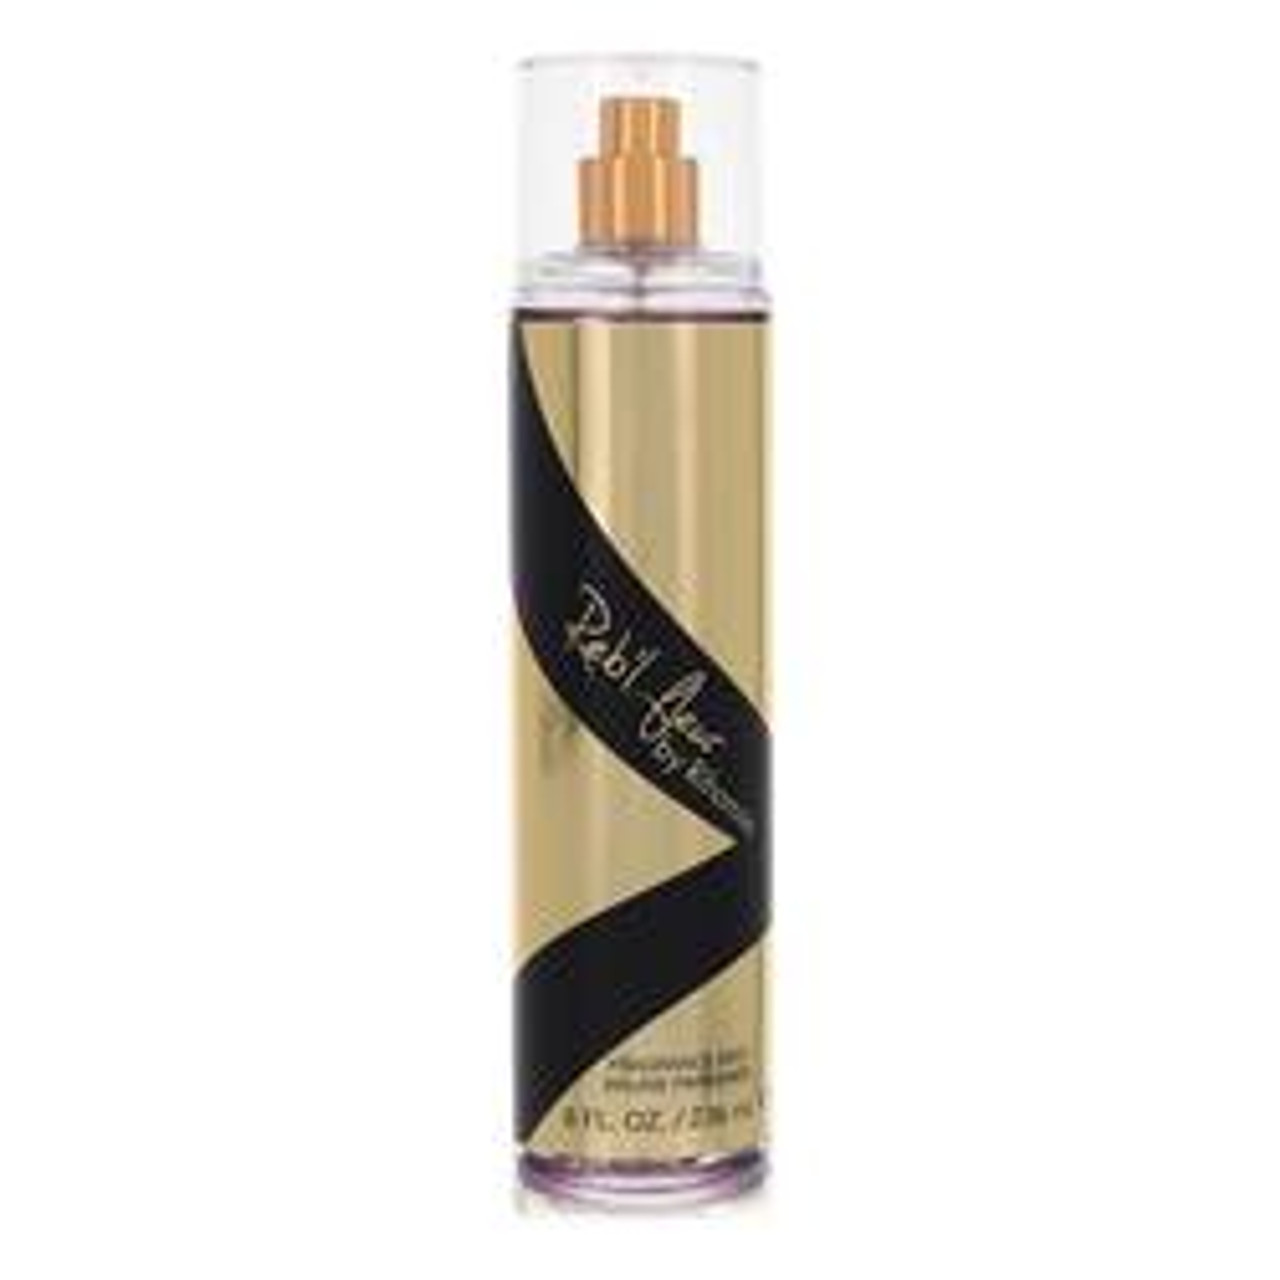 Reb'l Fleur Perfume By Rihanna Body Mist 8 oz for Women - [From 31.00 - Choose pk Qty ] - *Ships from Miami